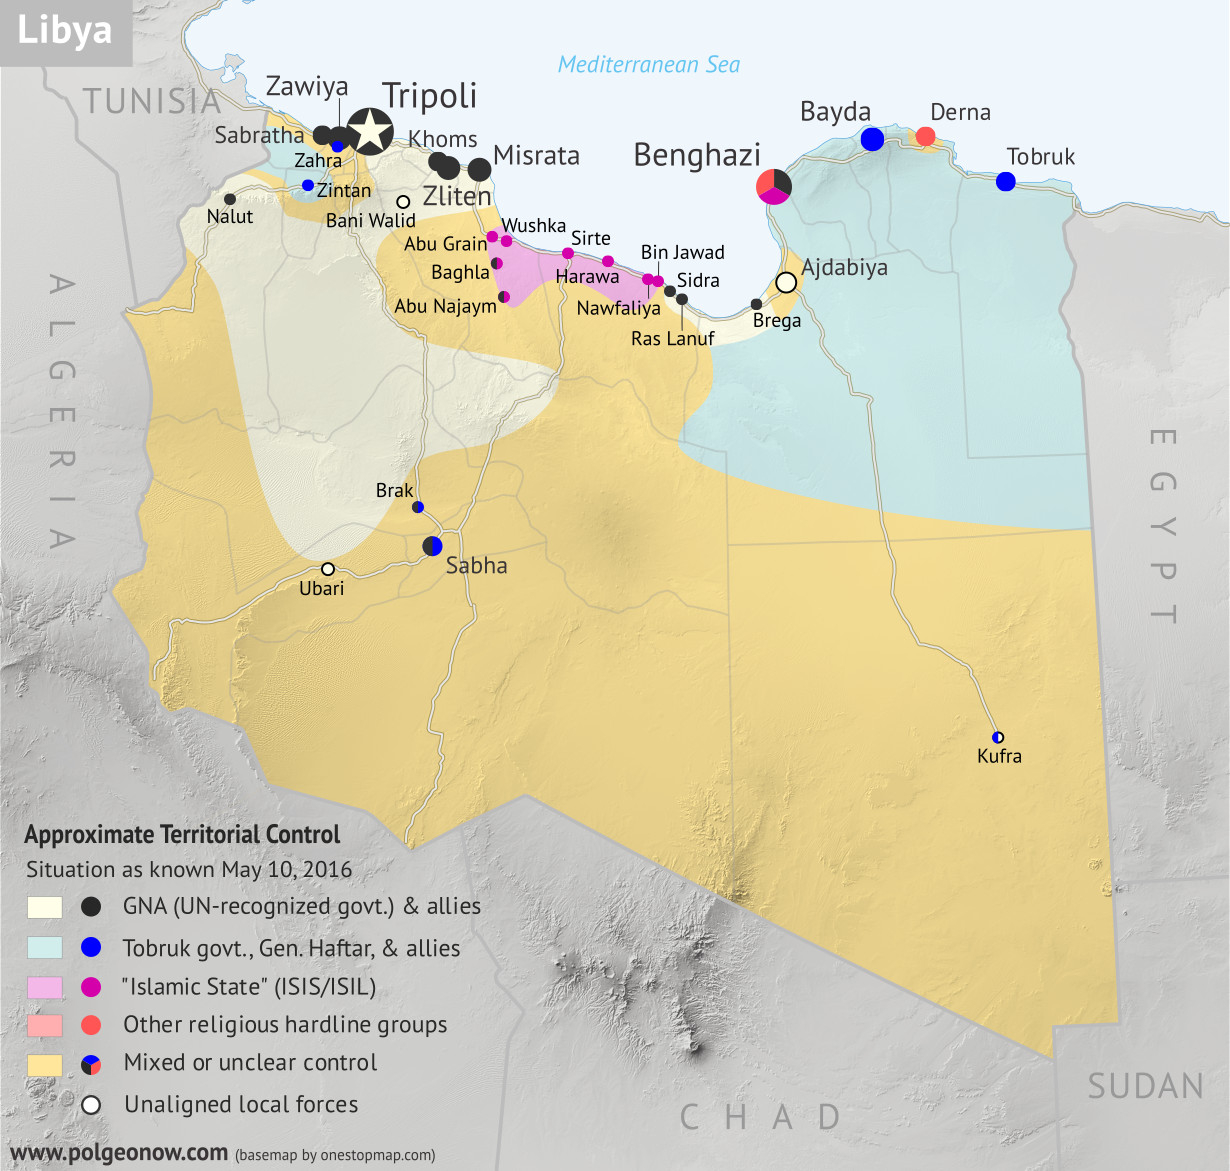 Libya control map: Shows detailed territorial control in Libya's civil war as of May 2016, reflecting the political realignment after UN peace deal, including all major parties (Government of National Accord (GNA), Tobruk House of Representatives, General Haftar's Libyan National Army, Zintan militias, Petroleum Facilities Guard (PFG); Tripoli GNC government, Libya Dawn, and Libya Shield Force; Shura Council of Benghazi Revolutionaries and other hardline Islamist groups; and the so-called Islamic State (ISIS/ISIL)). Also file under: Map of Islamic State (ISIS or ISIL) control in Libya. Now includes terrain and major roads. Color blind accessible.